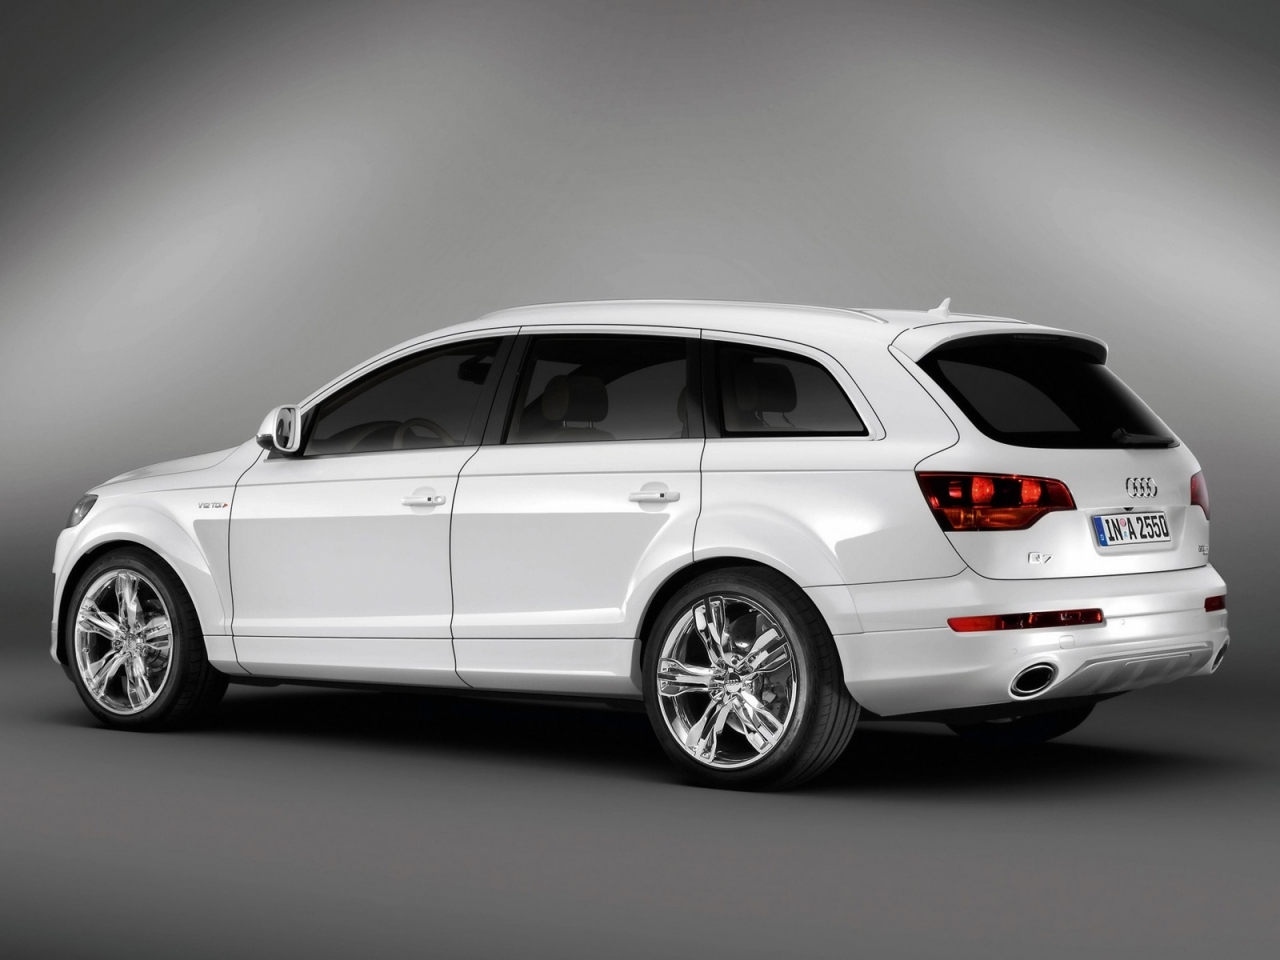 Audi Q7 Coastline Rear and Side for 1280 x 960 resolution